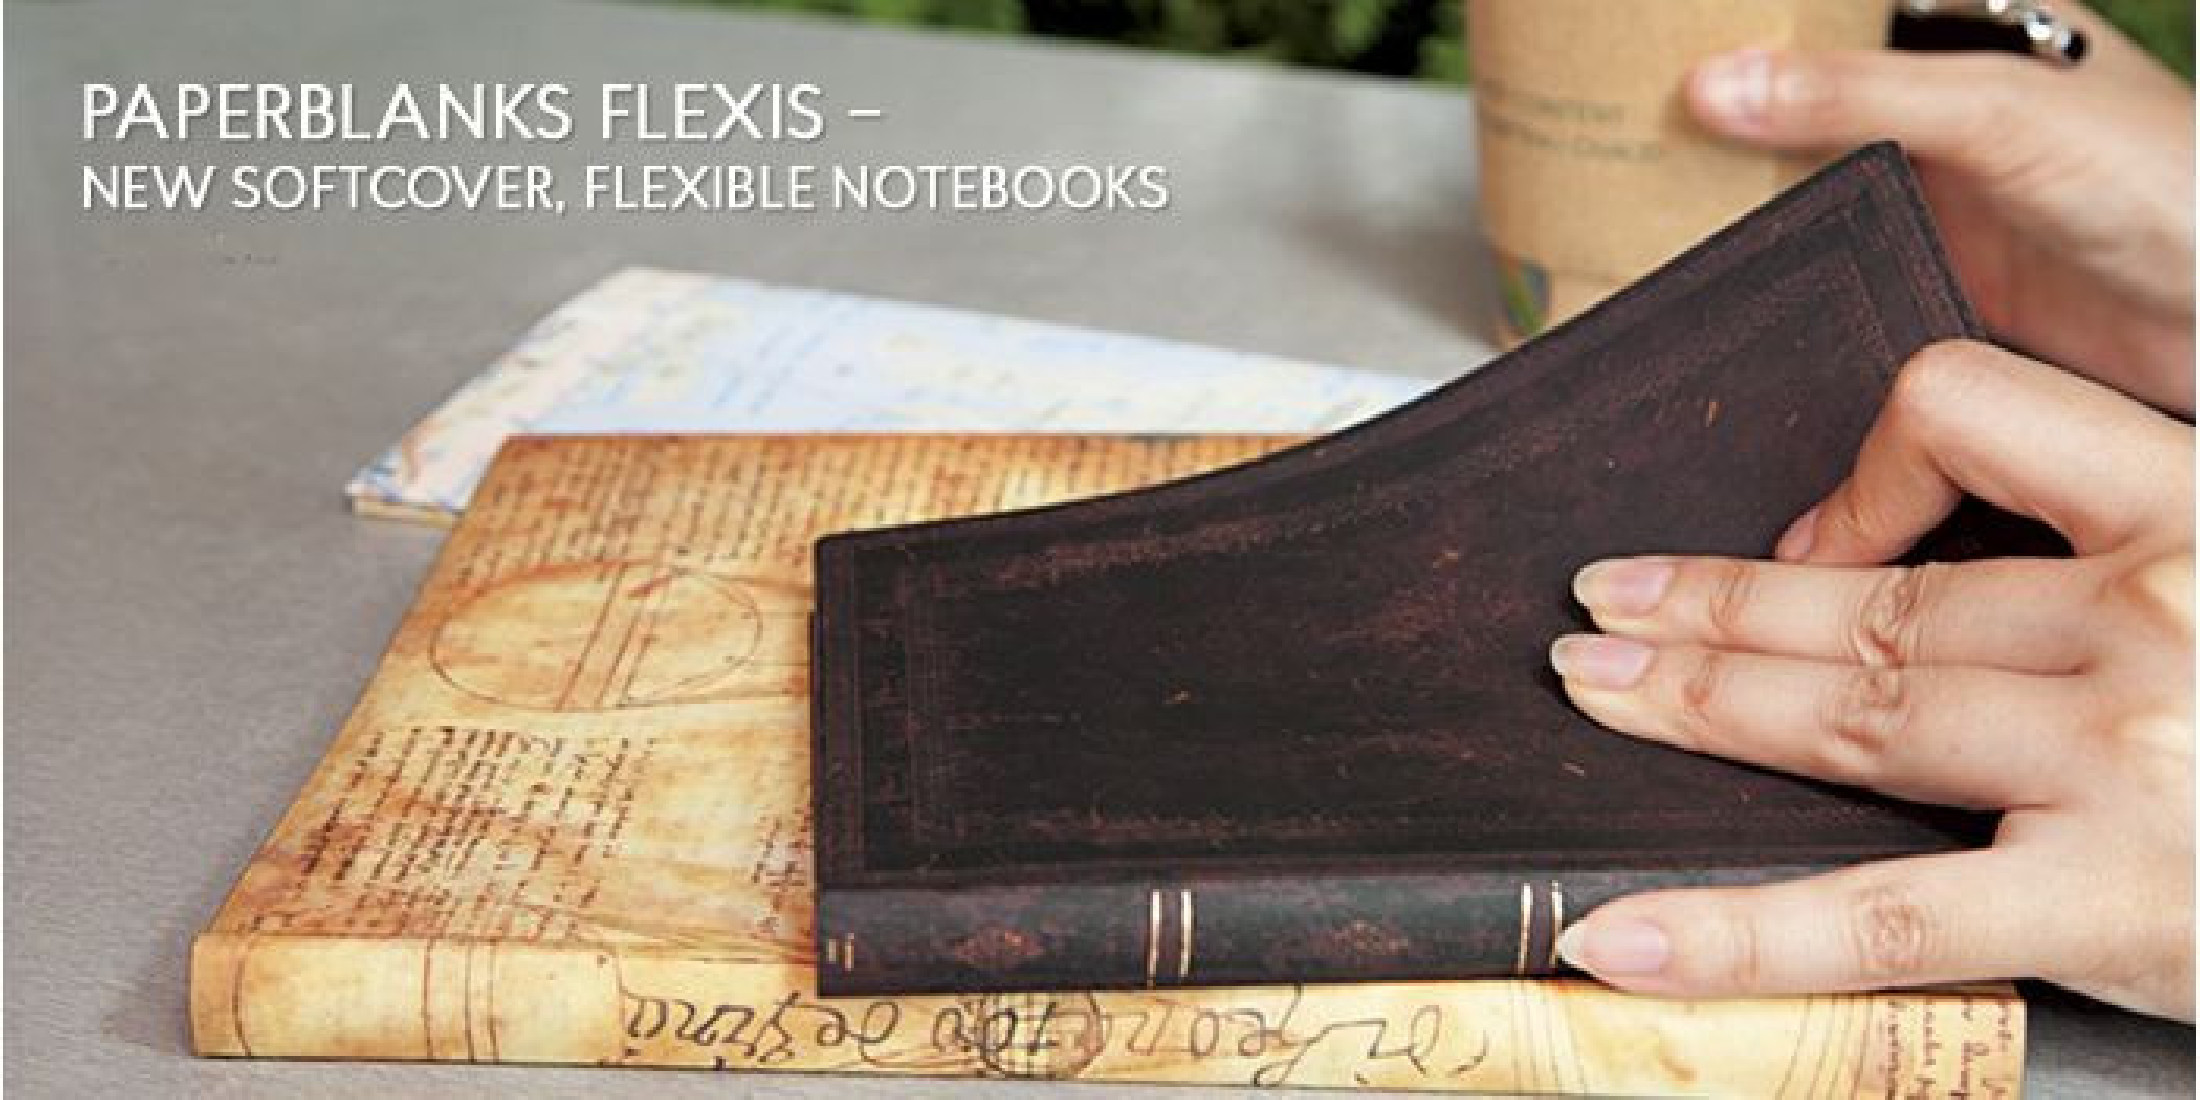 Notebook Flexi Ultra 23x18 (144 pages) Lined Sun and Moonlight Paperblanks